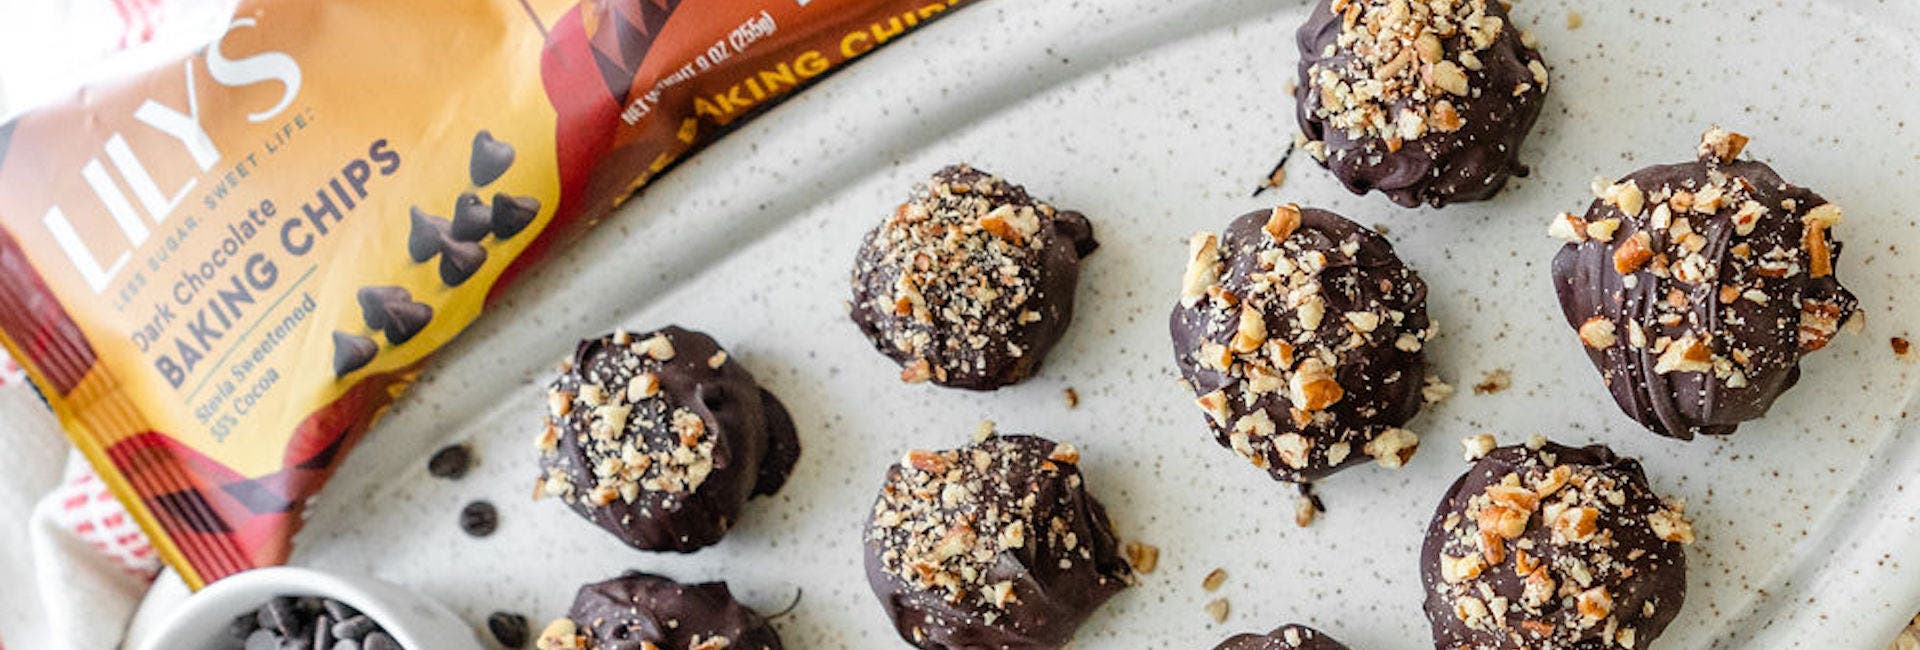 Chocolate Covered Trail Mix Peanut Butter Balls